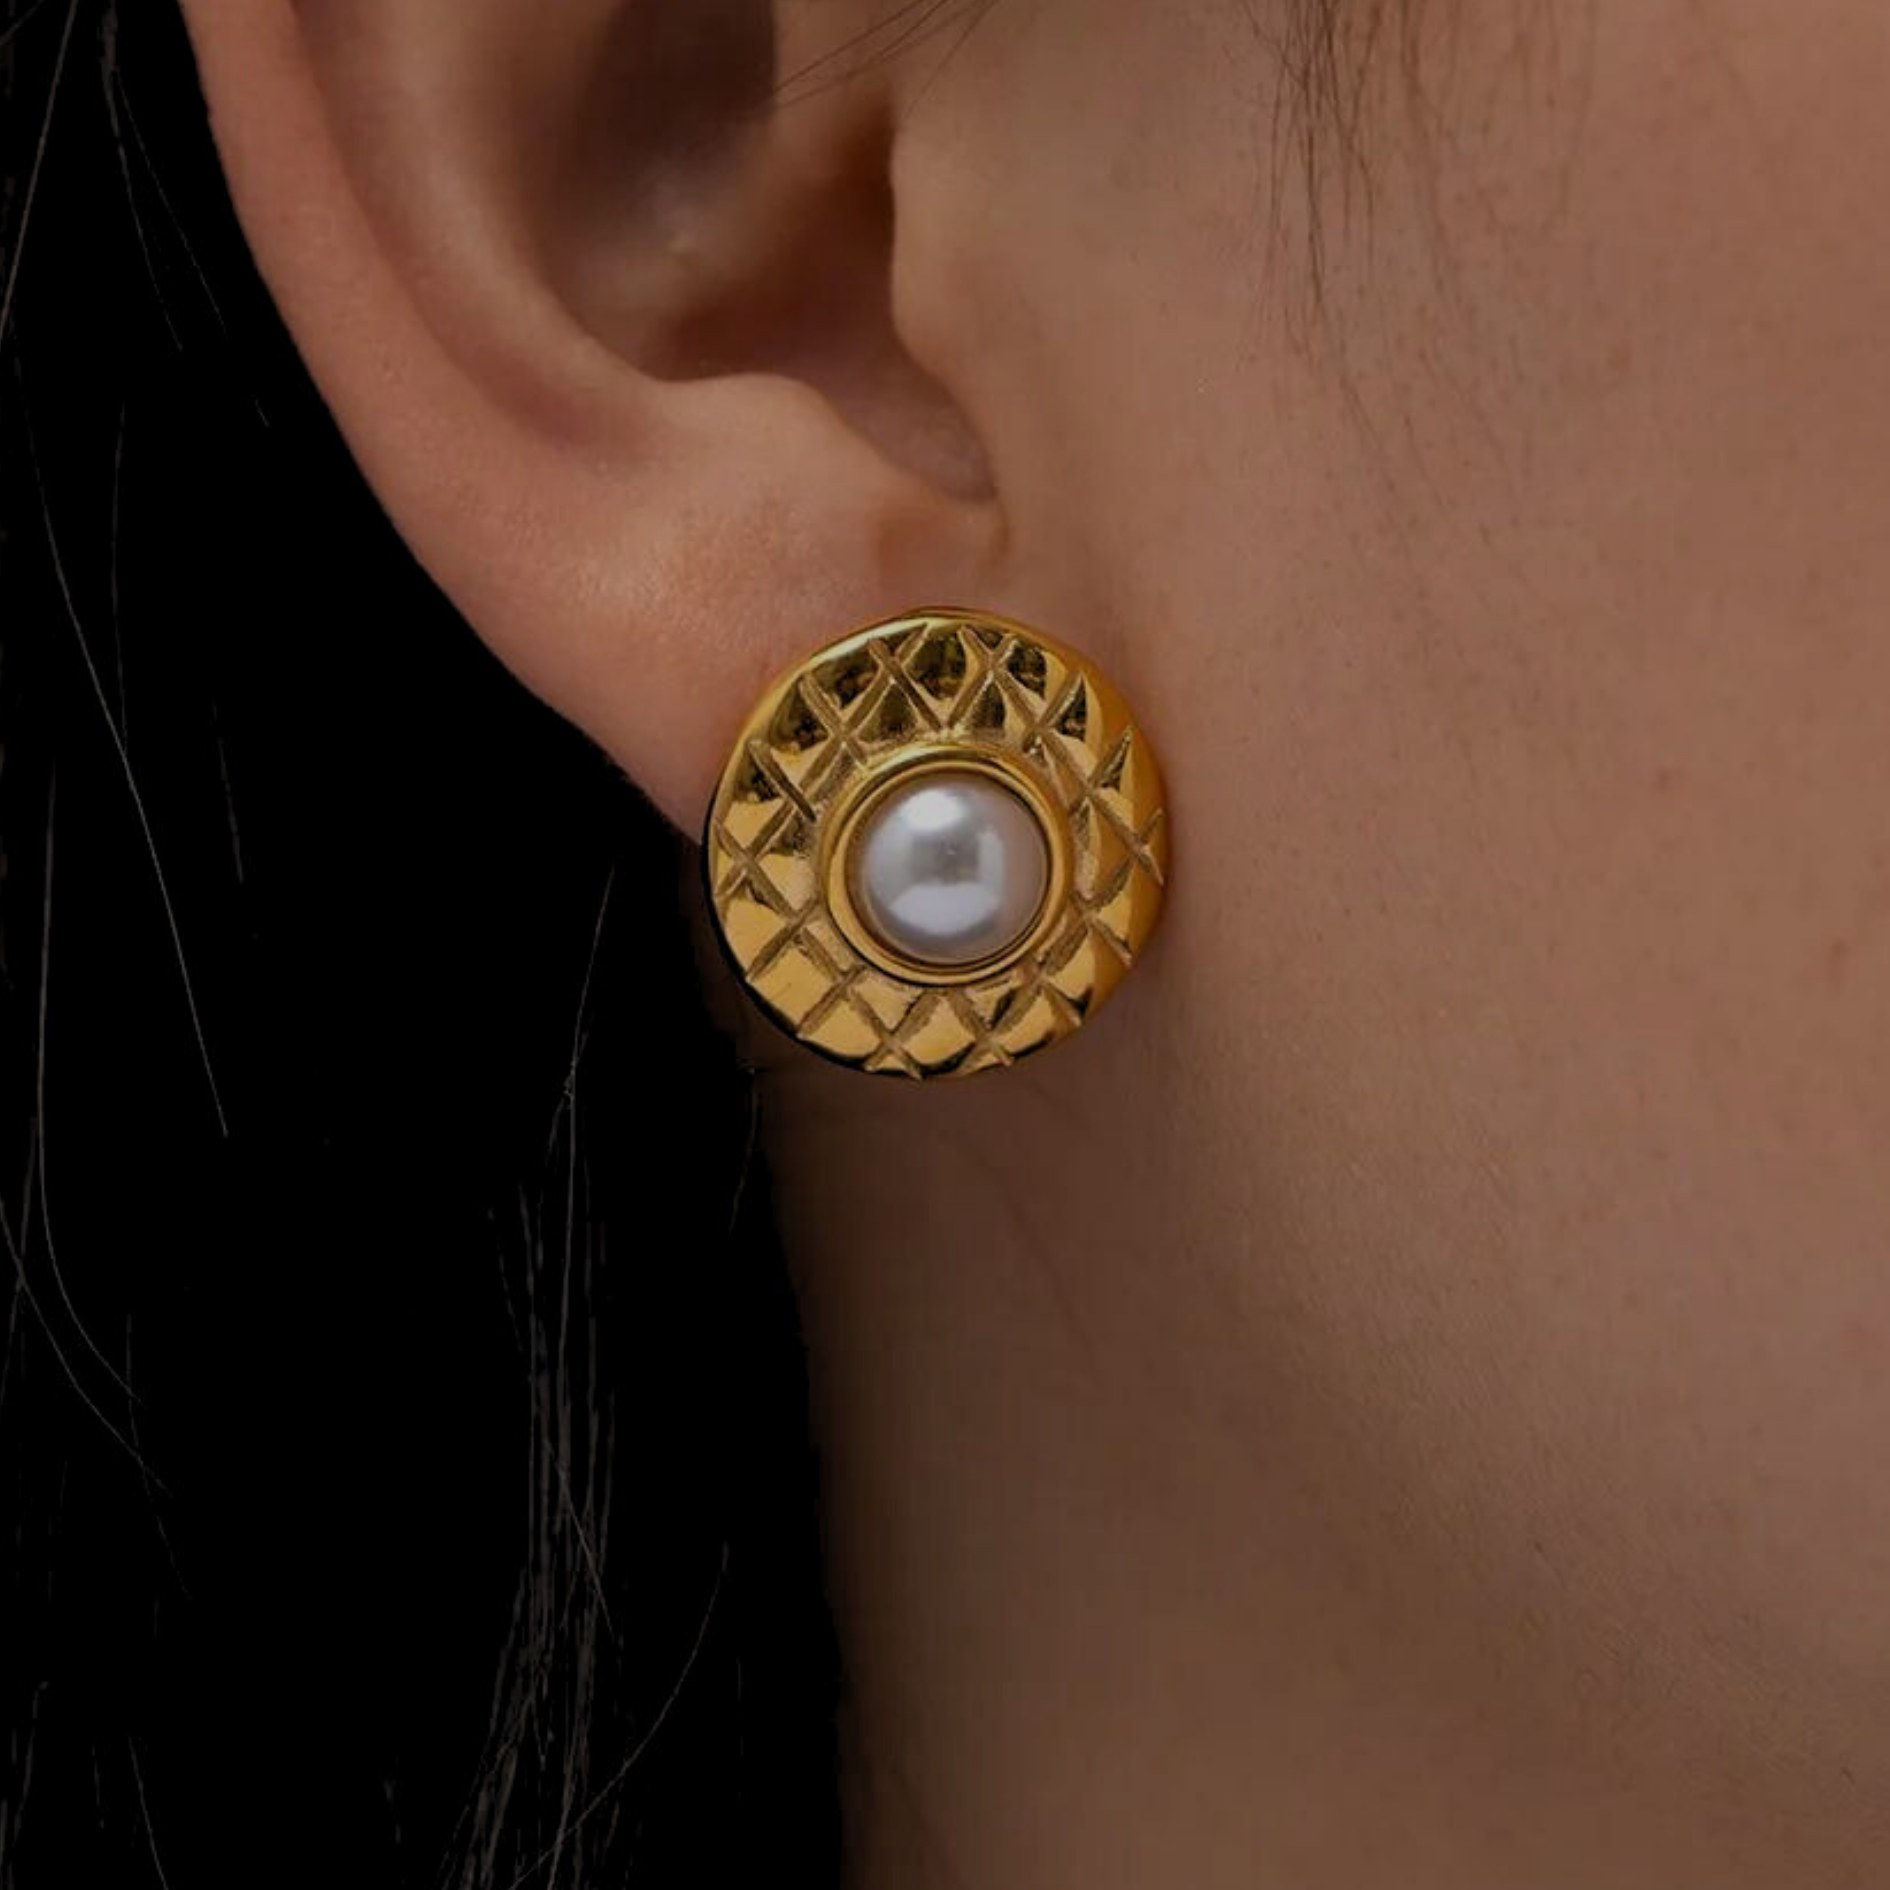 Square Stud earrrings with a white pearl in the middle. the gold corcle part is like a disc engraved in rhombus shapes.